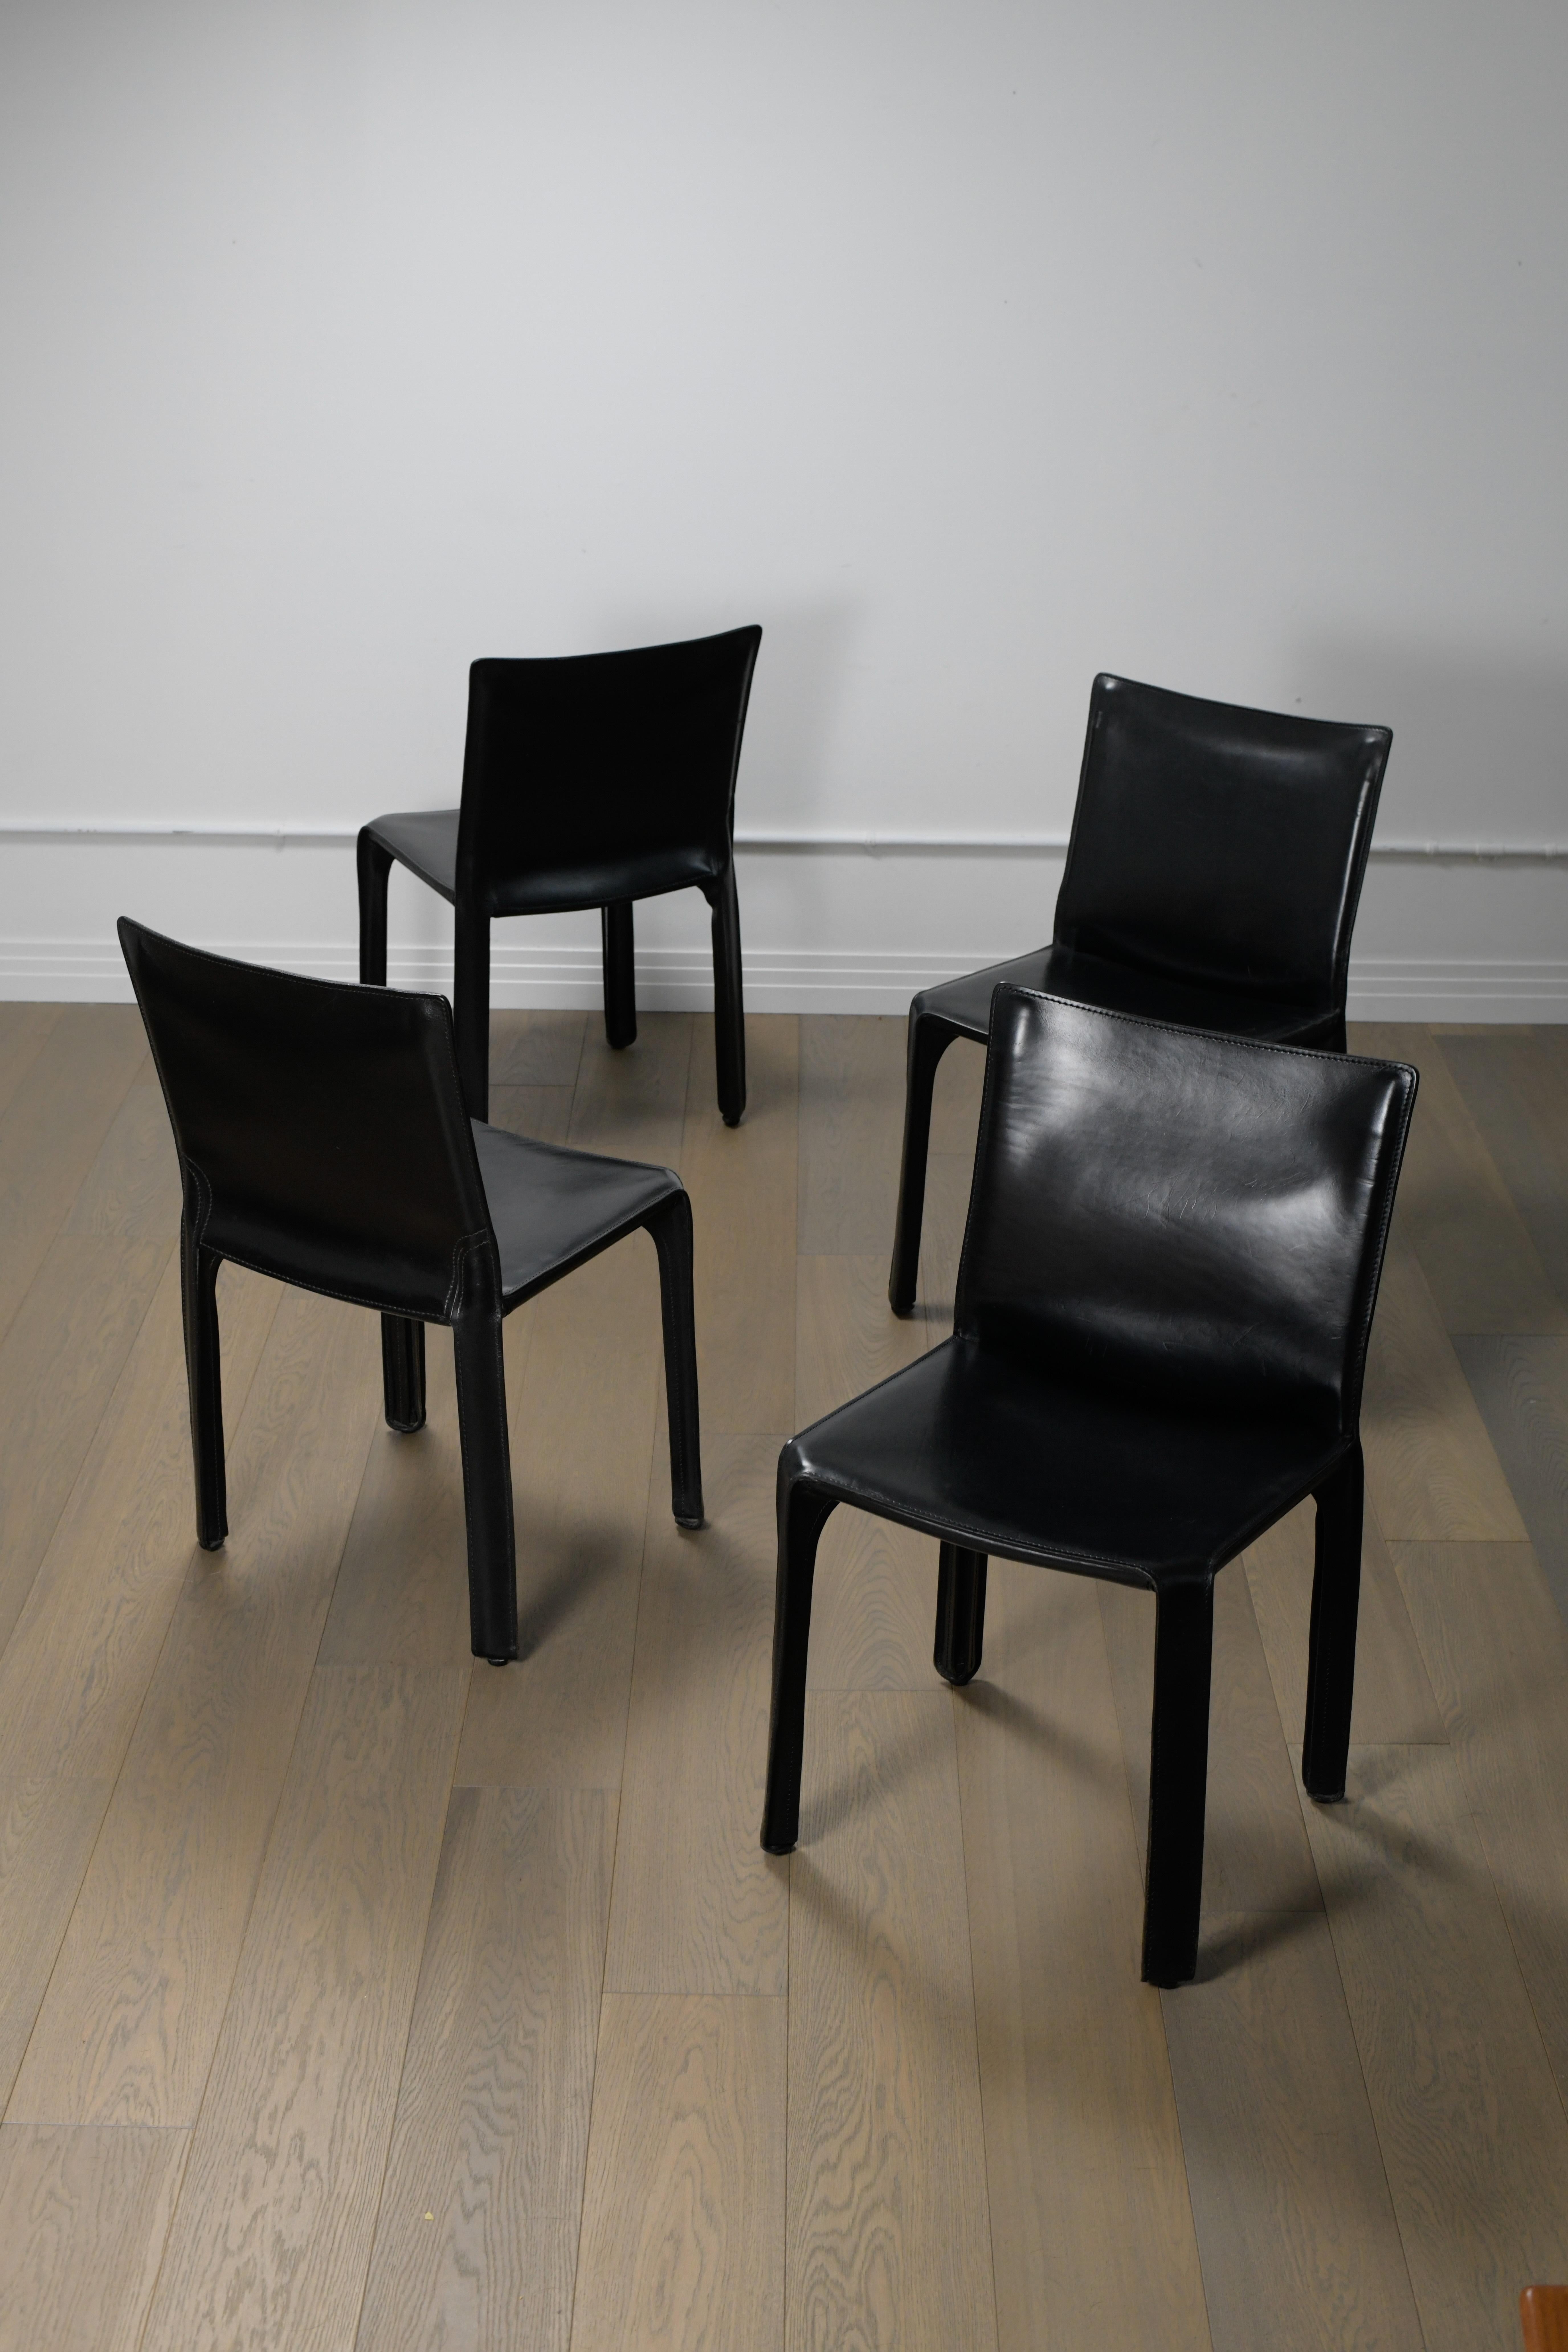 Set of four 1970s Mario Bellini Cab chairs in black leather by Cassina. These beautiful dining chairs are in good vintage condition with a nice patina commensurate with their age. There are a few small scratches on the seats and backs of one of the